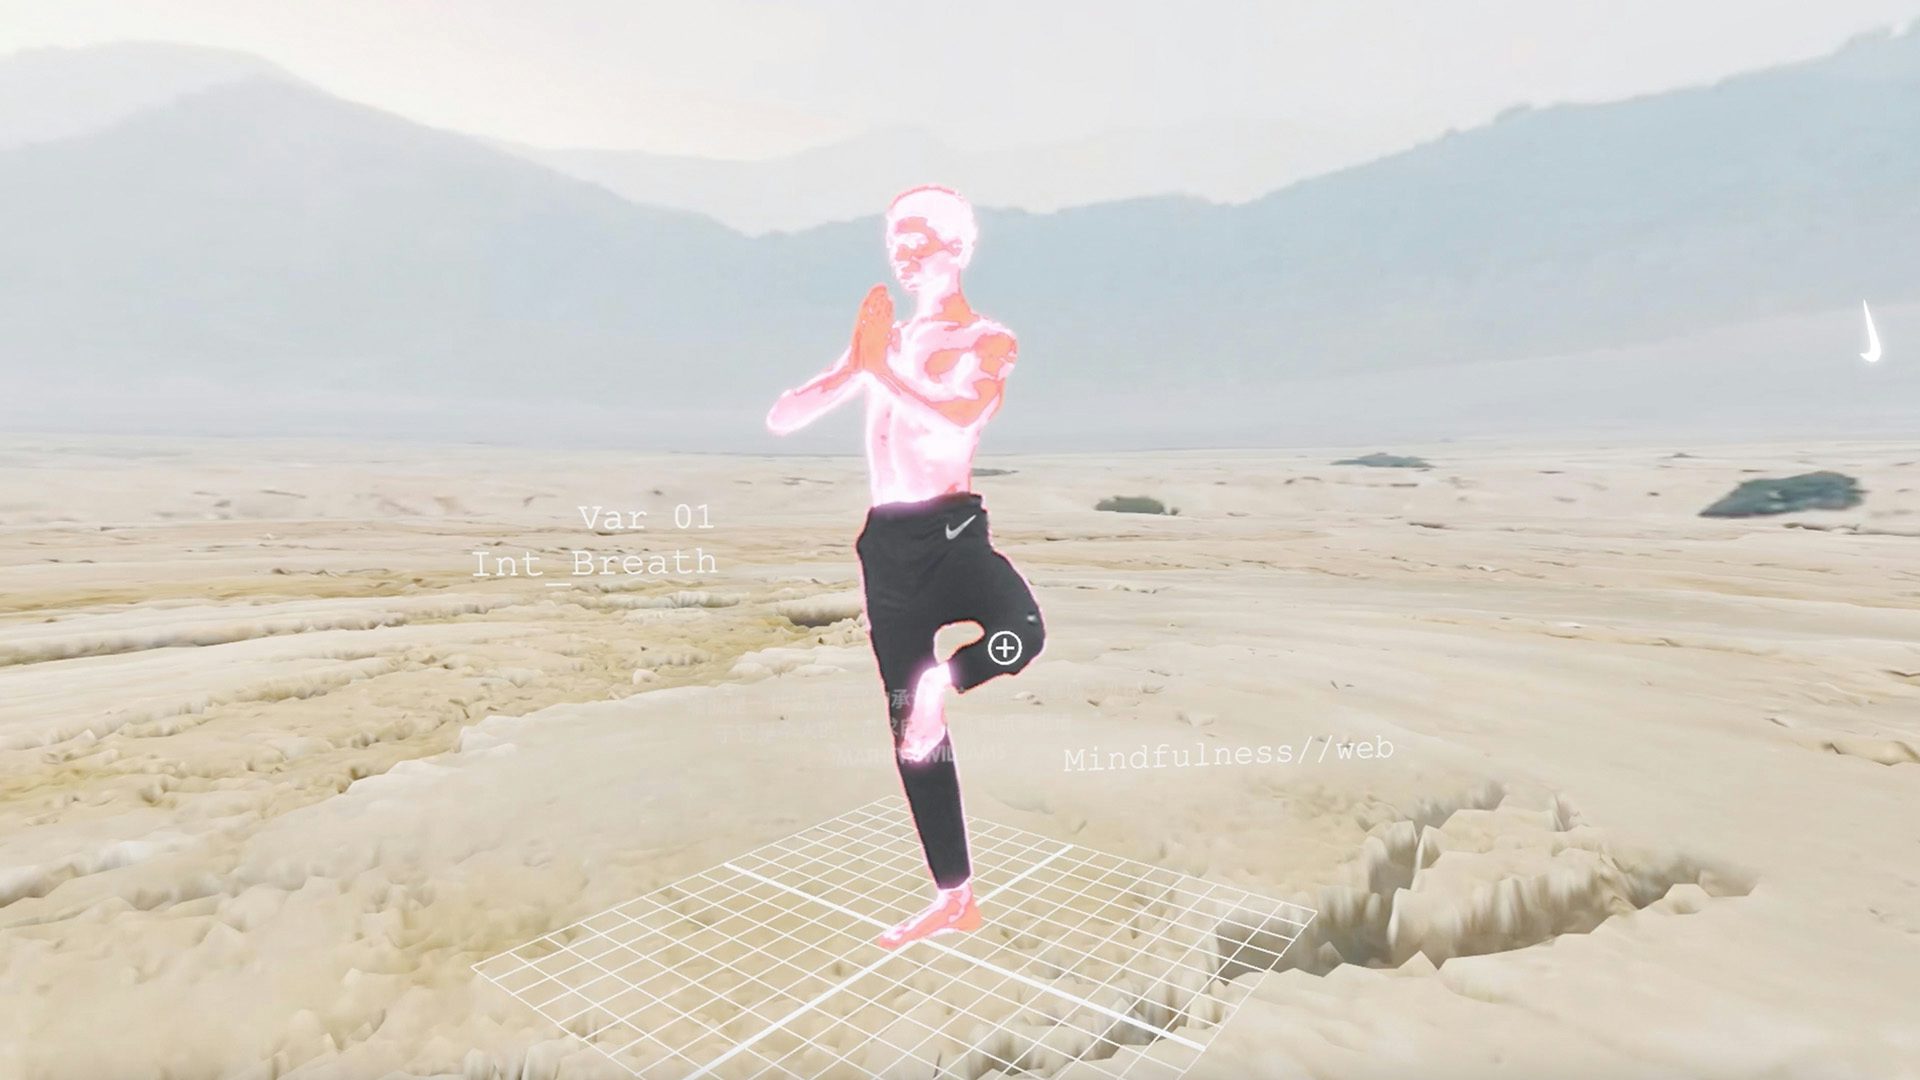 Still graphic showing a desert yoga environment, from Nike's Trove experience by BBH China